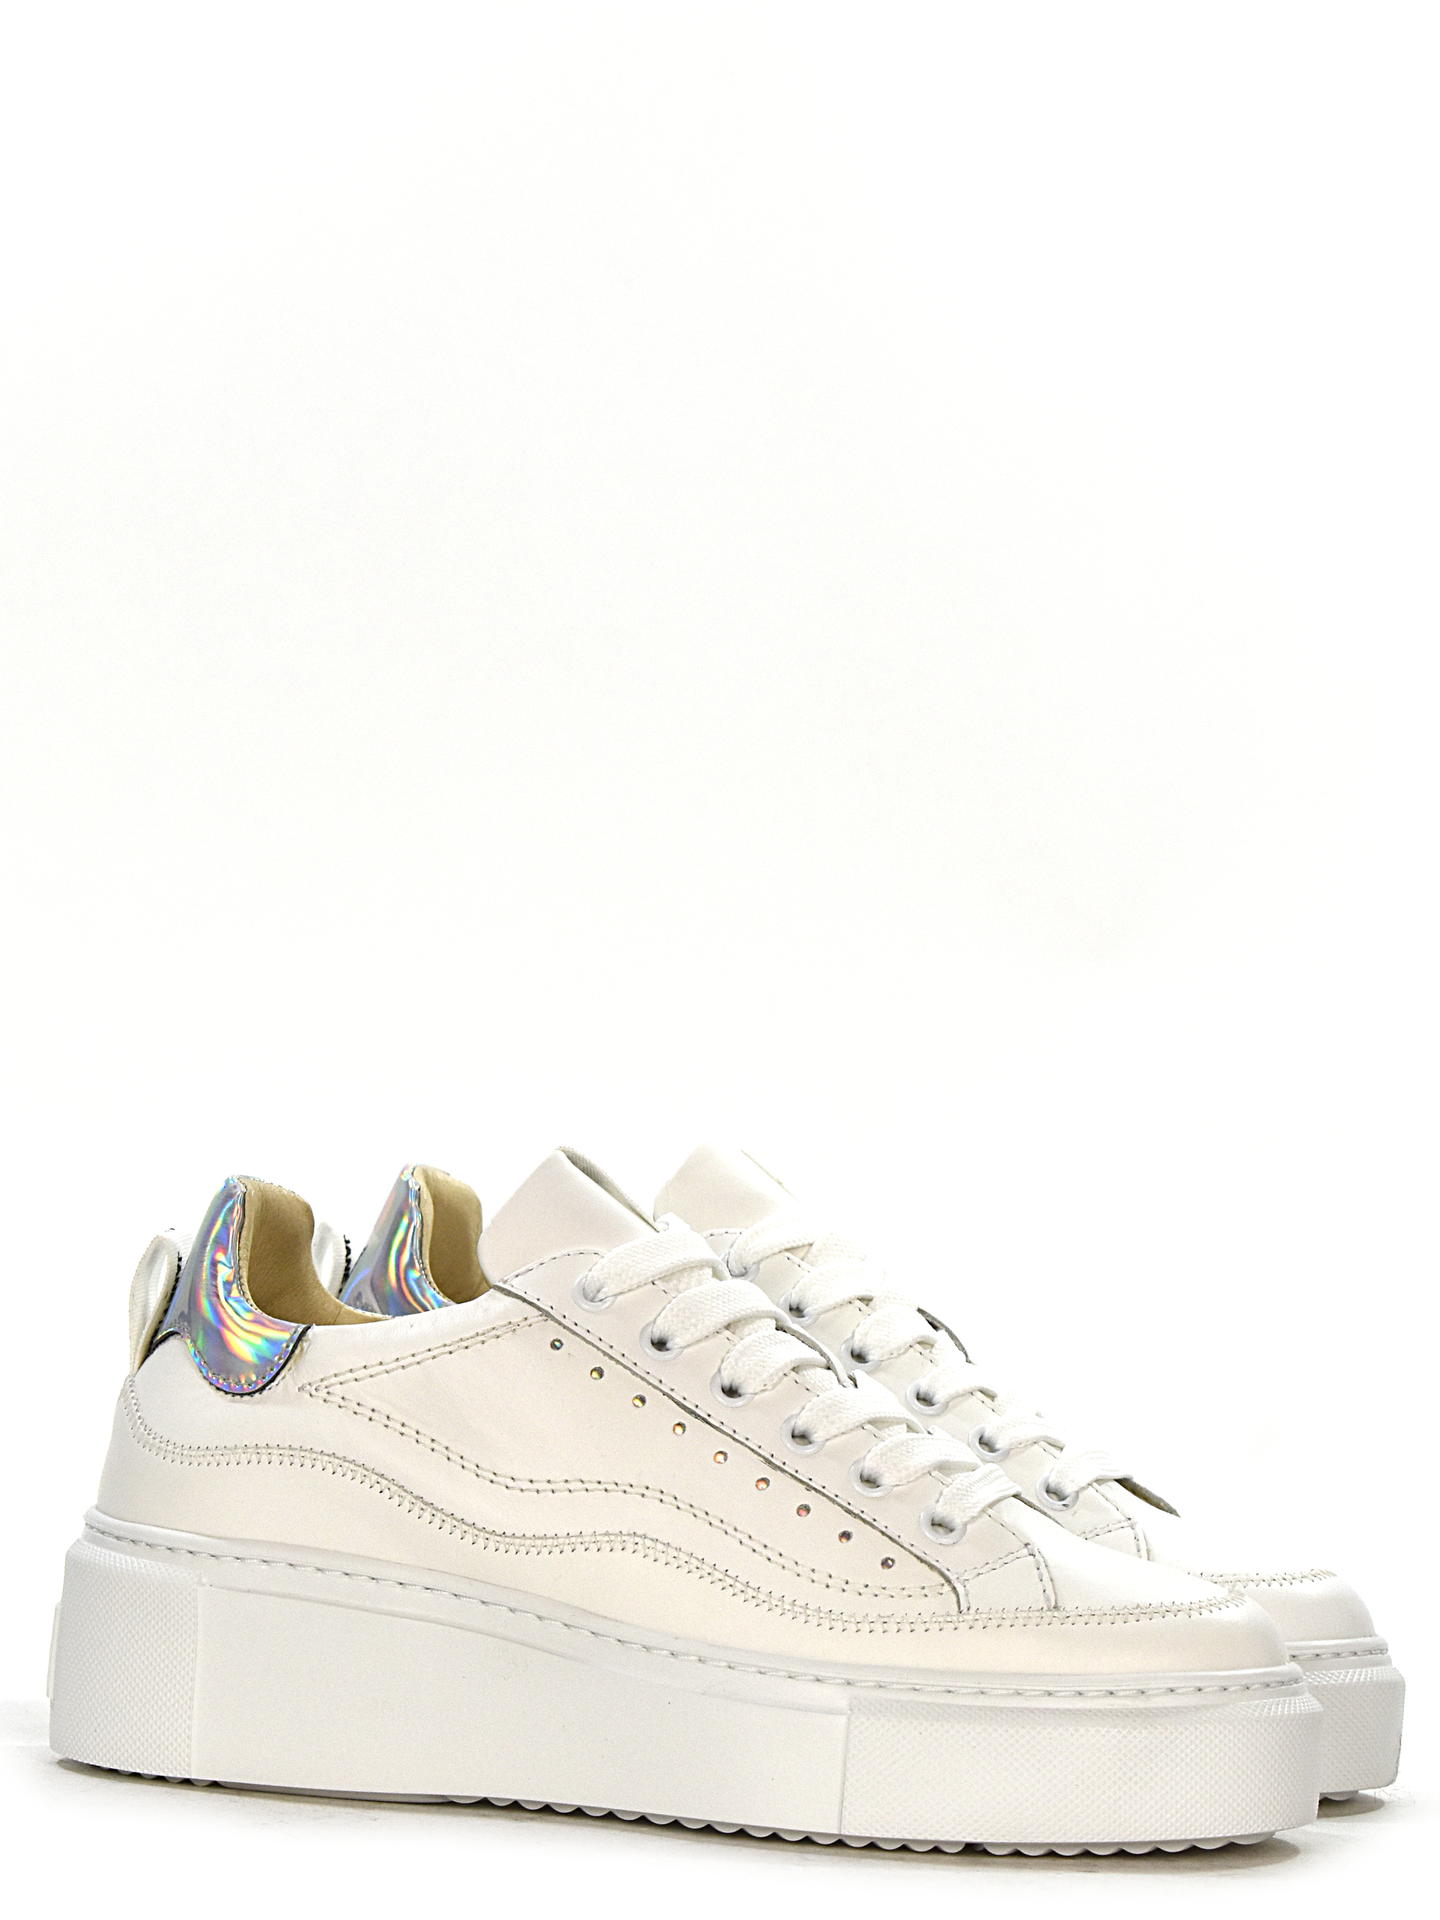 SNEAKERS JANET SPORT 45825 BIANCO | DESIDERIO COLLECTION